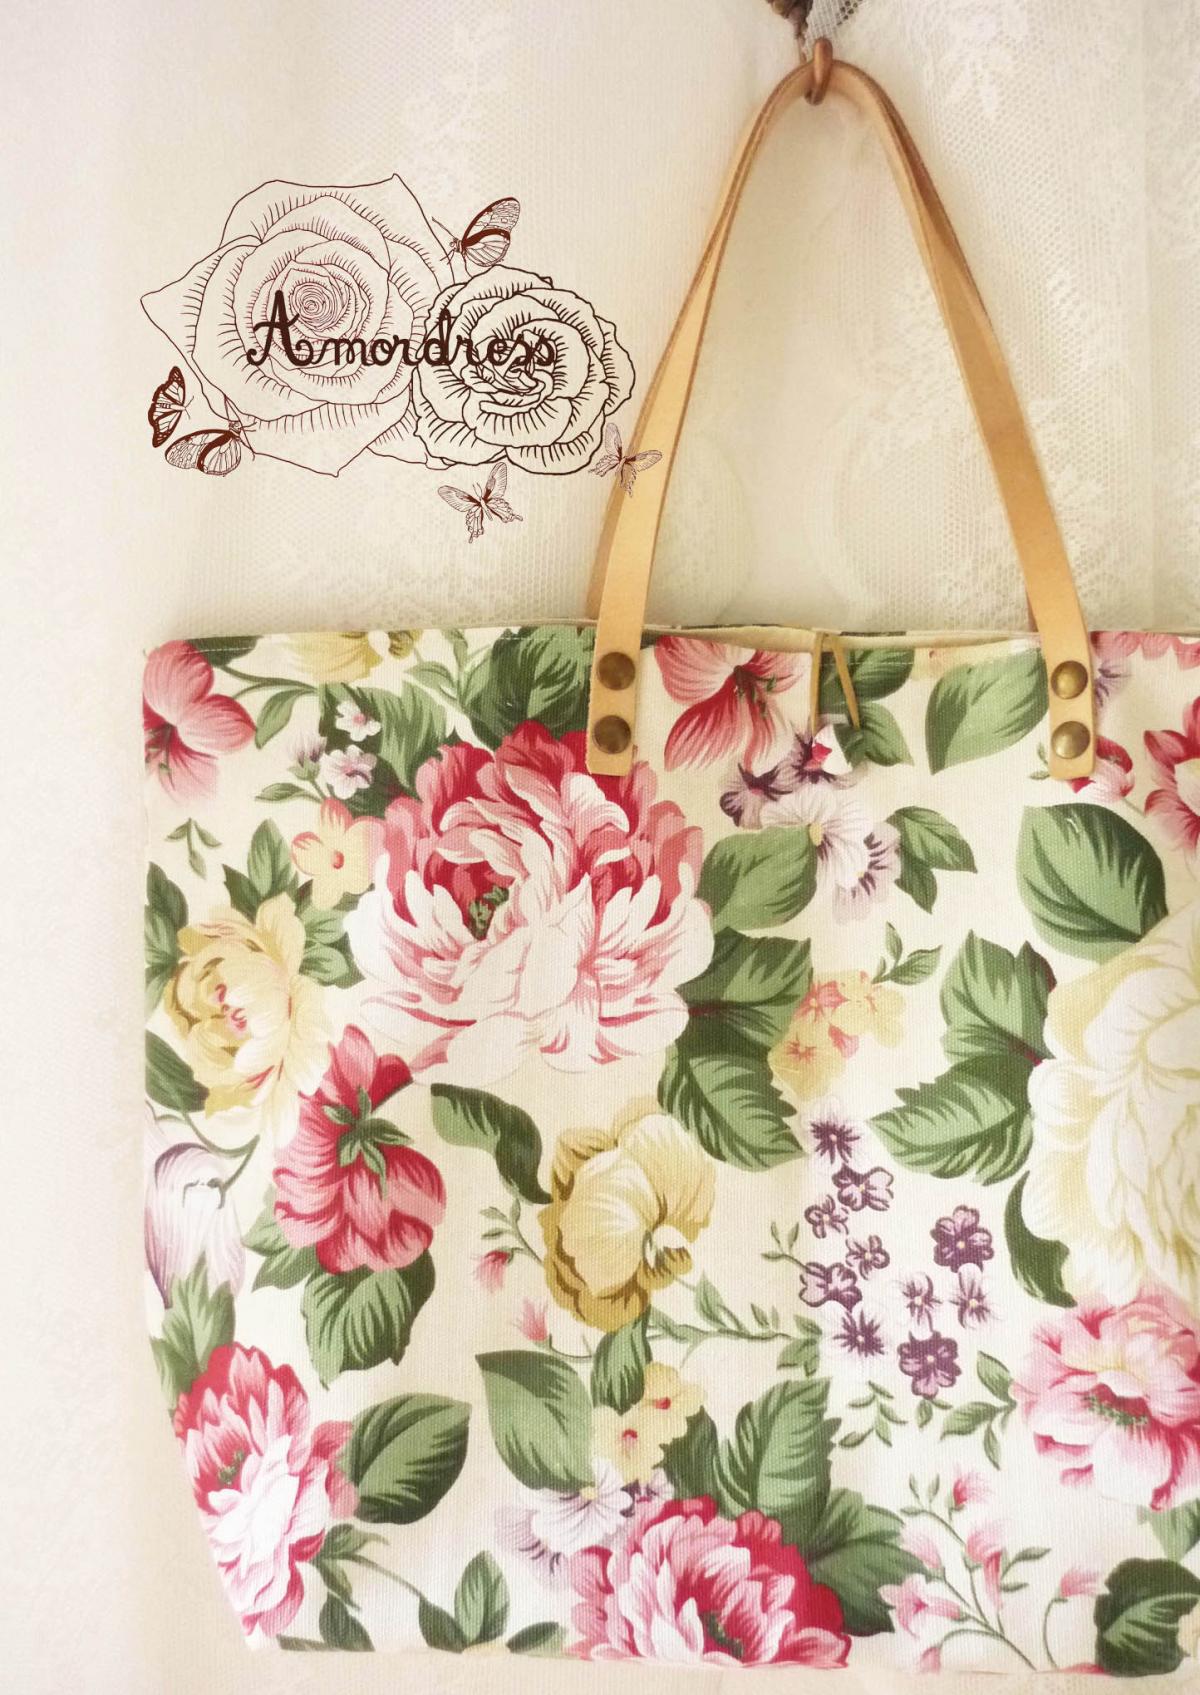 Floral Tote Bag Printed Canvas Bag Genuine Leather Strap White Cream With Floral Garden Shabby ...